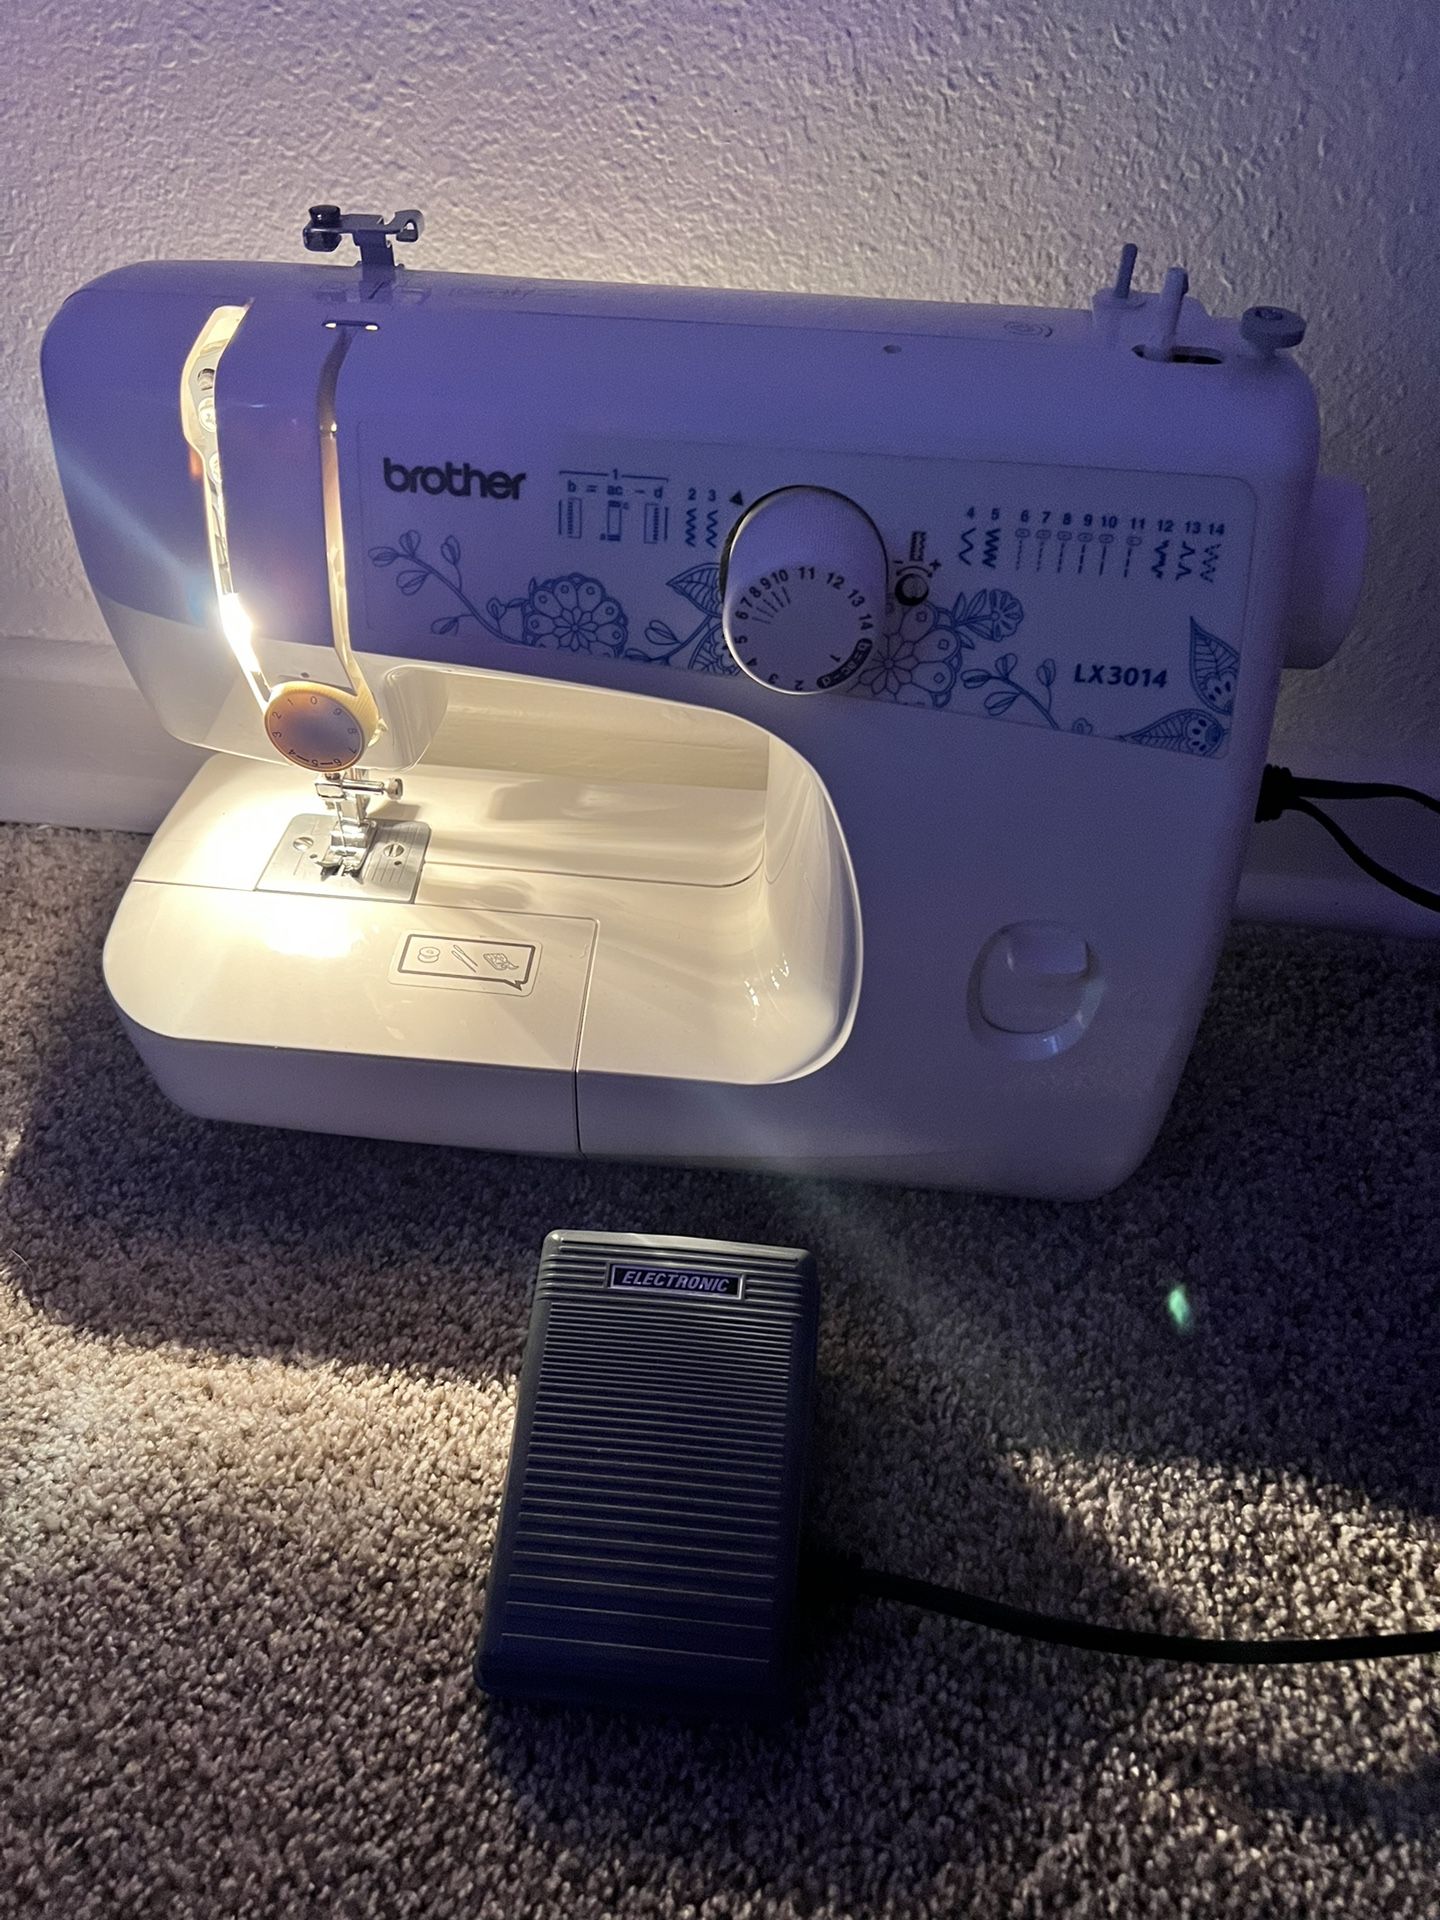 Brother LX 3014 Sewing Machine